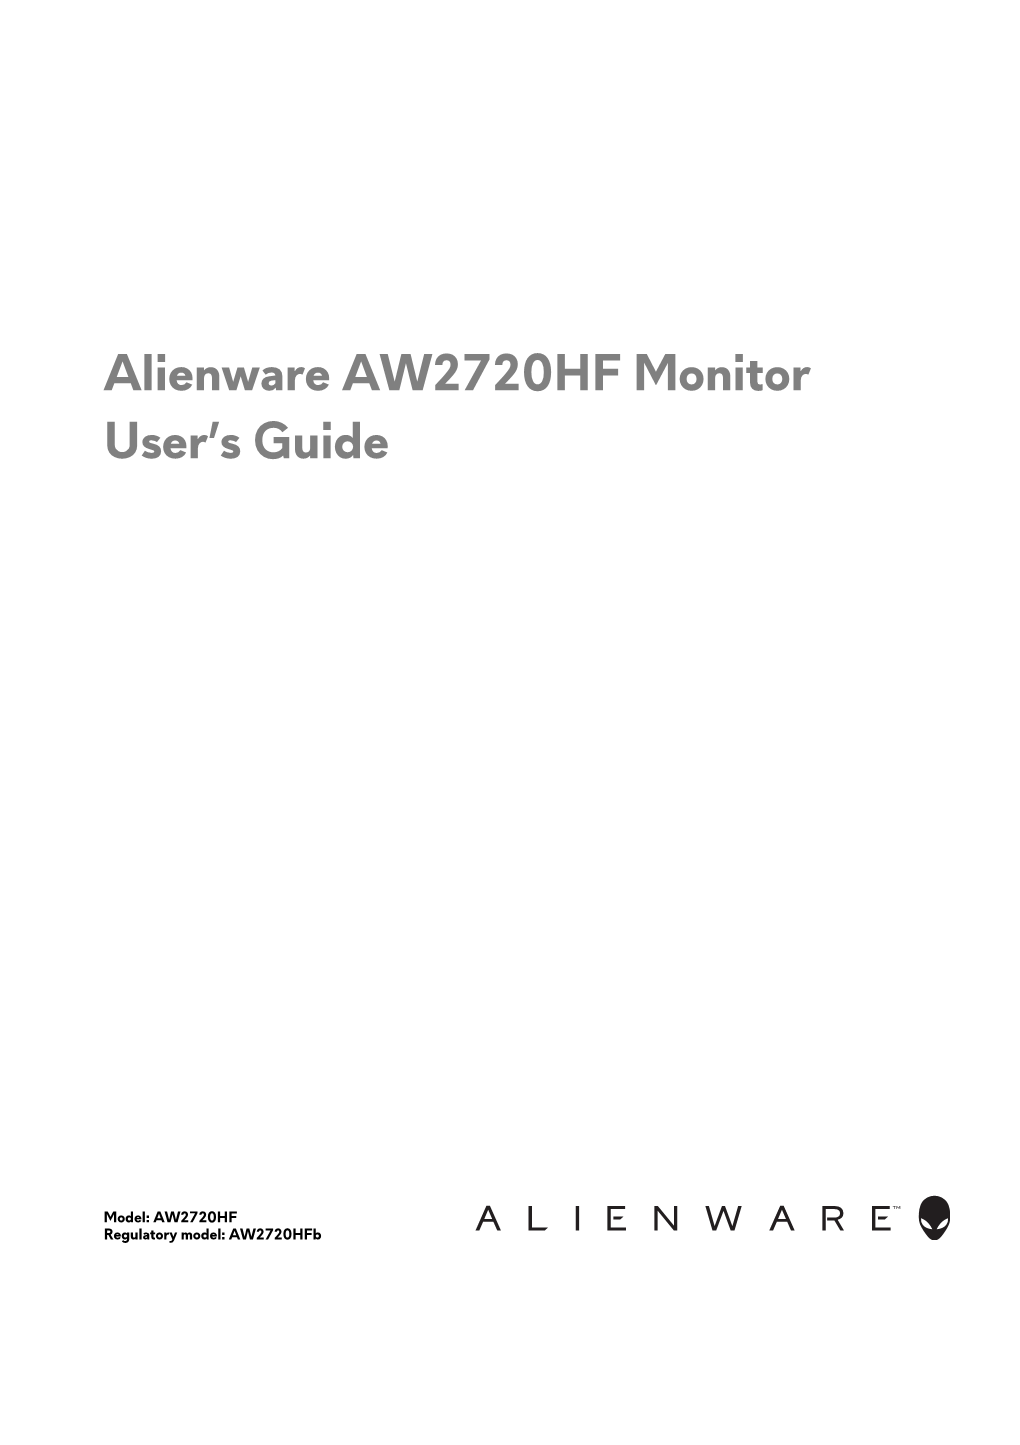 Alienware AW2720HF Monitor User's Guide